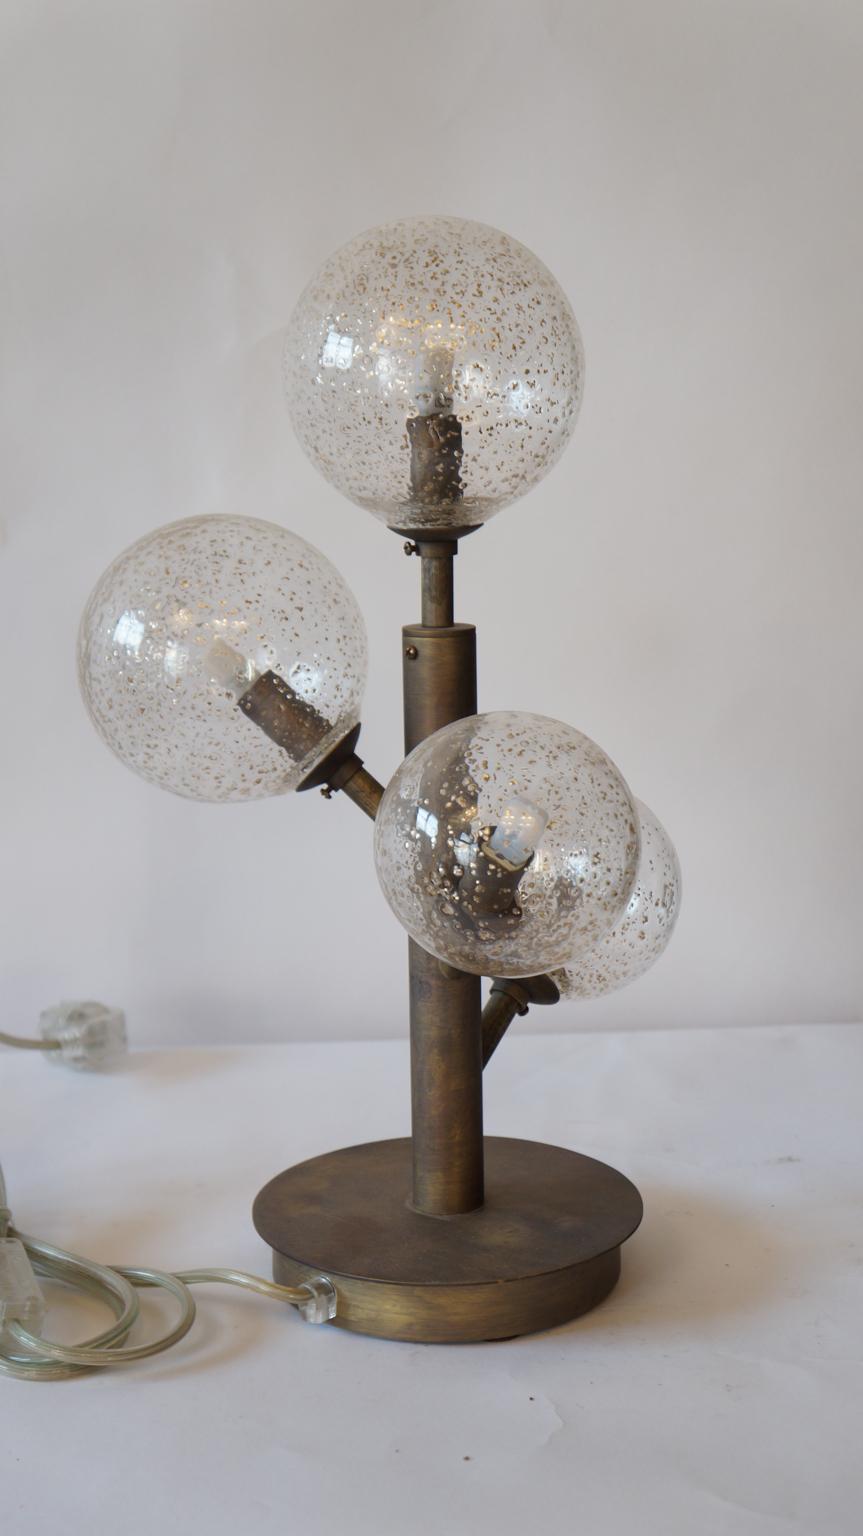 Alberto Donà Mid-Century Modern Crystal Mika One Murano Glass Table Lamp, 1998 For Sale 3